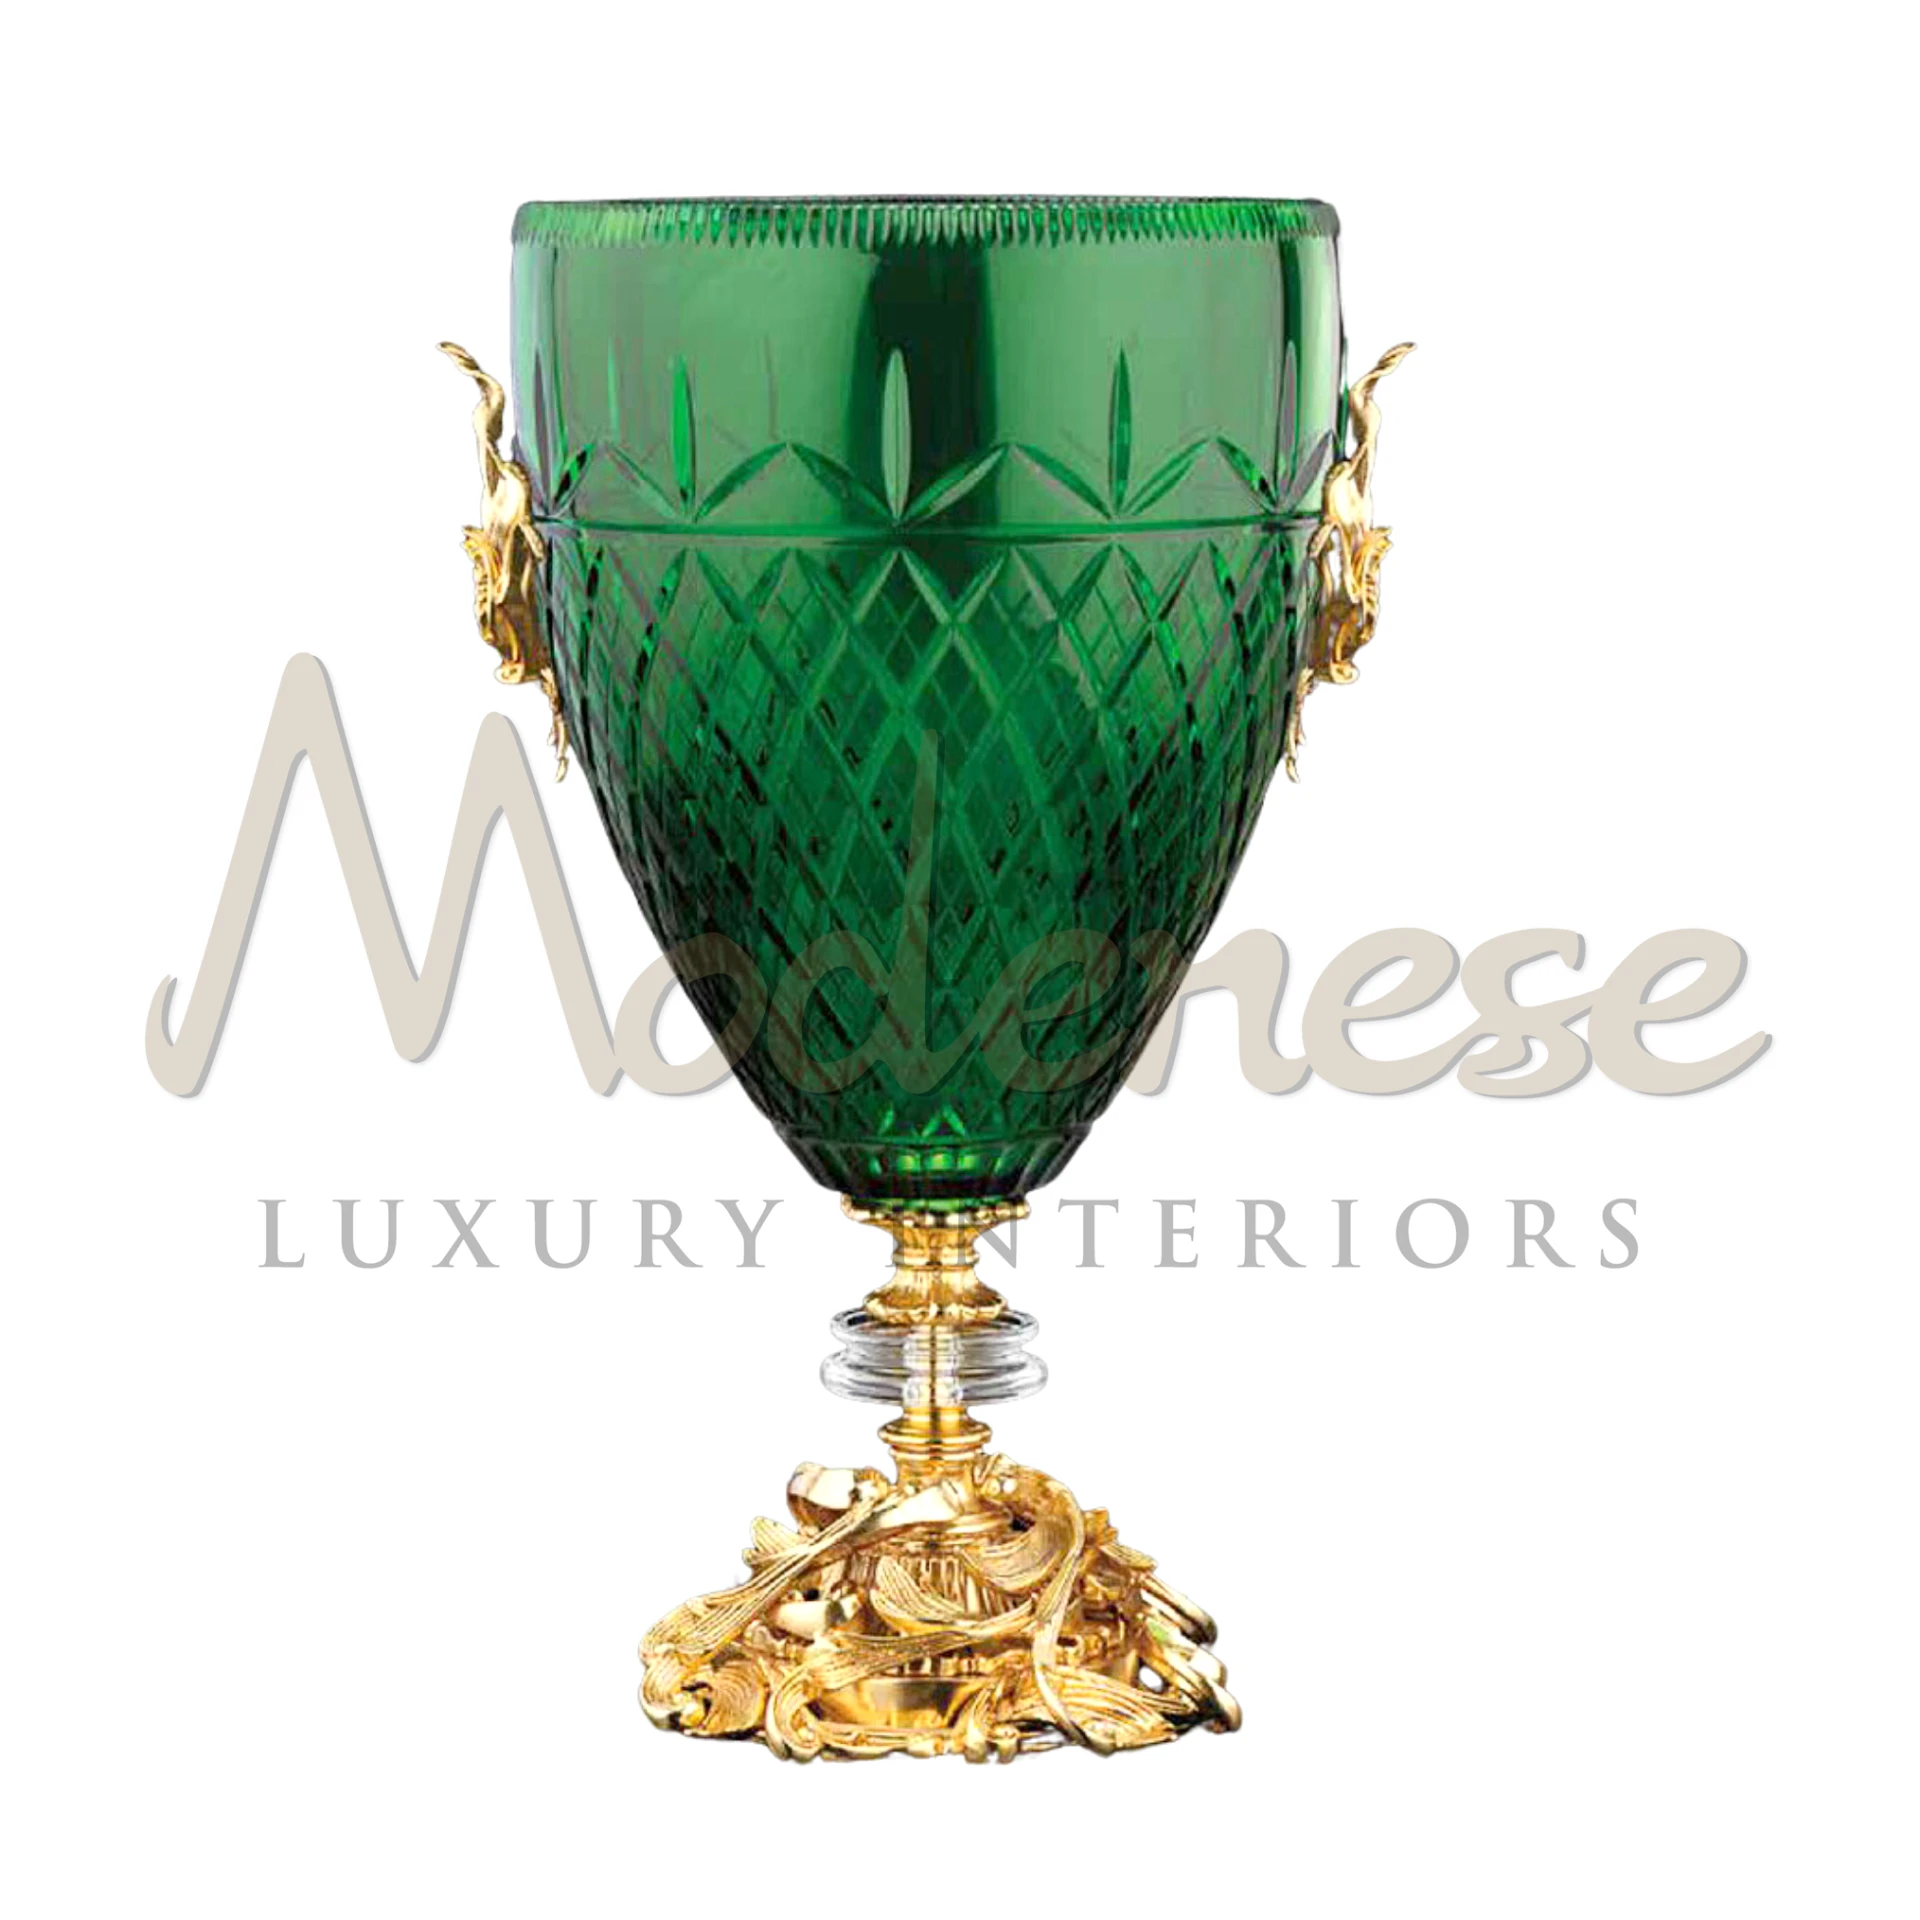 Elegant Stylish Green Glass Vase in Baroque and classic style, ideal for luxury interior design, showcasing high-quality craftsmanship and unique design.






